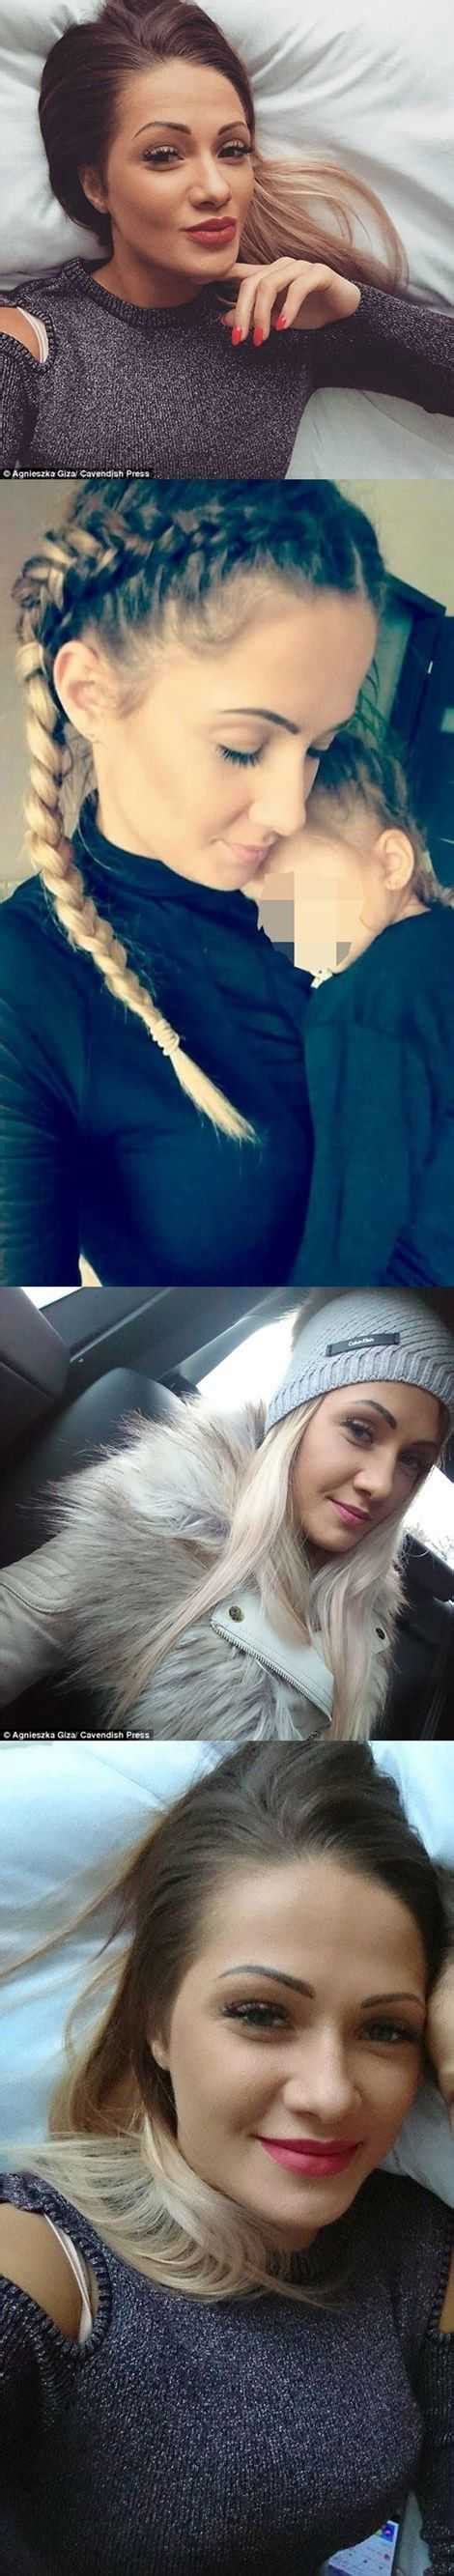 23 year old beautician hangs herself after argument with partner